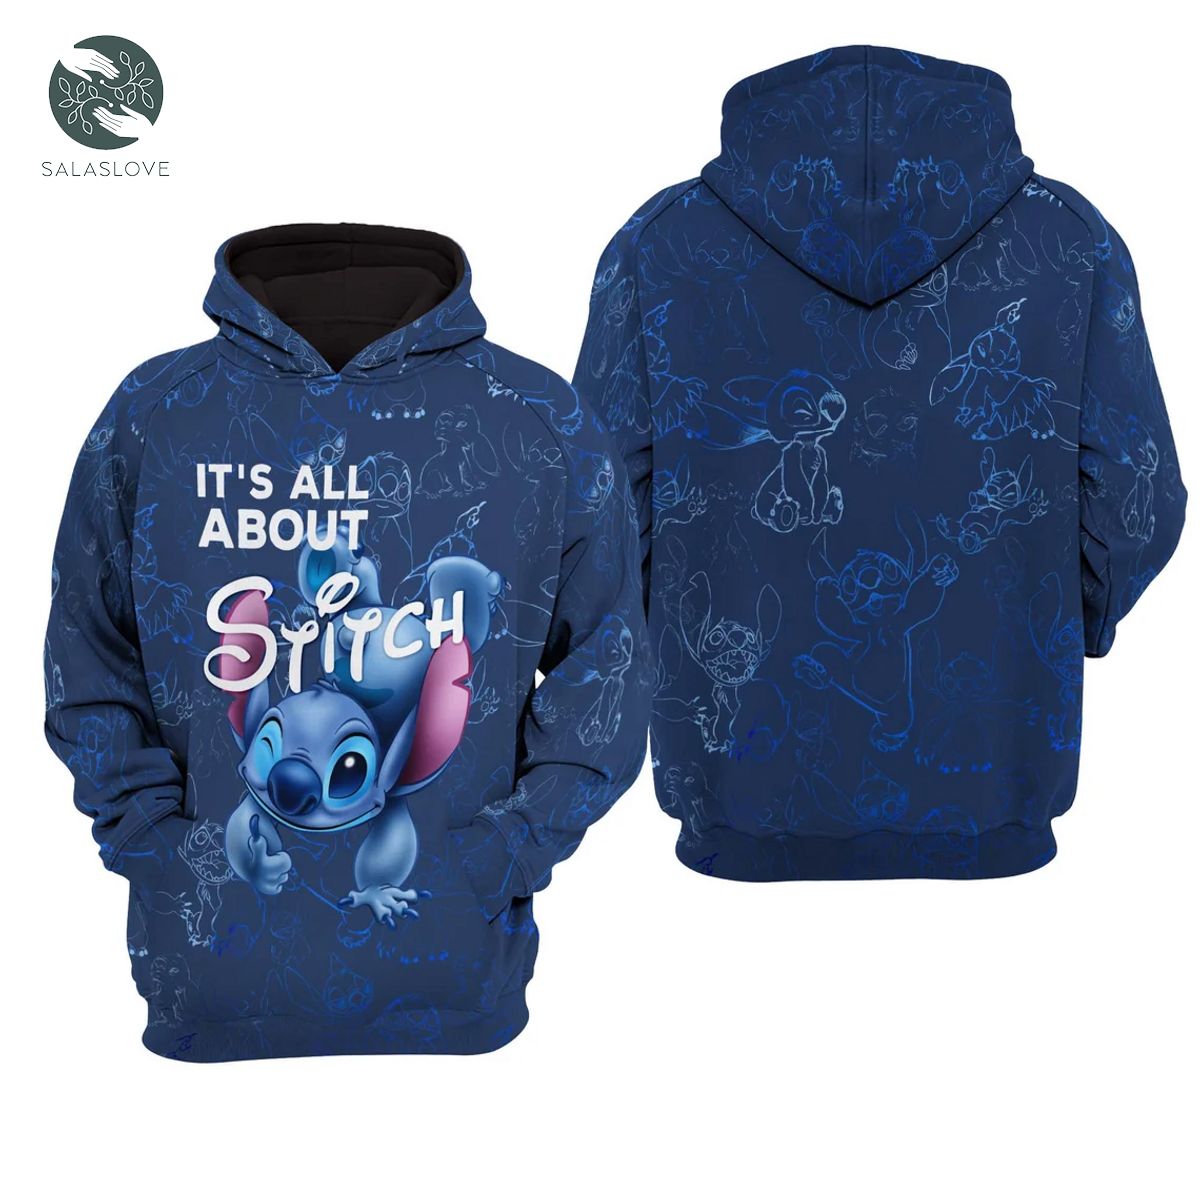 It's All About Stitch Disney Sweatshirt Hoodie Cartoon Christmas Outfit